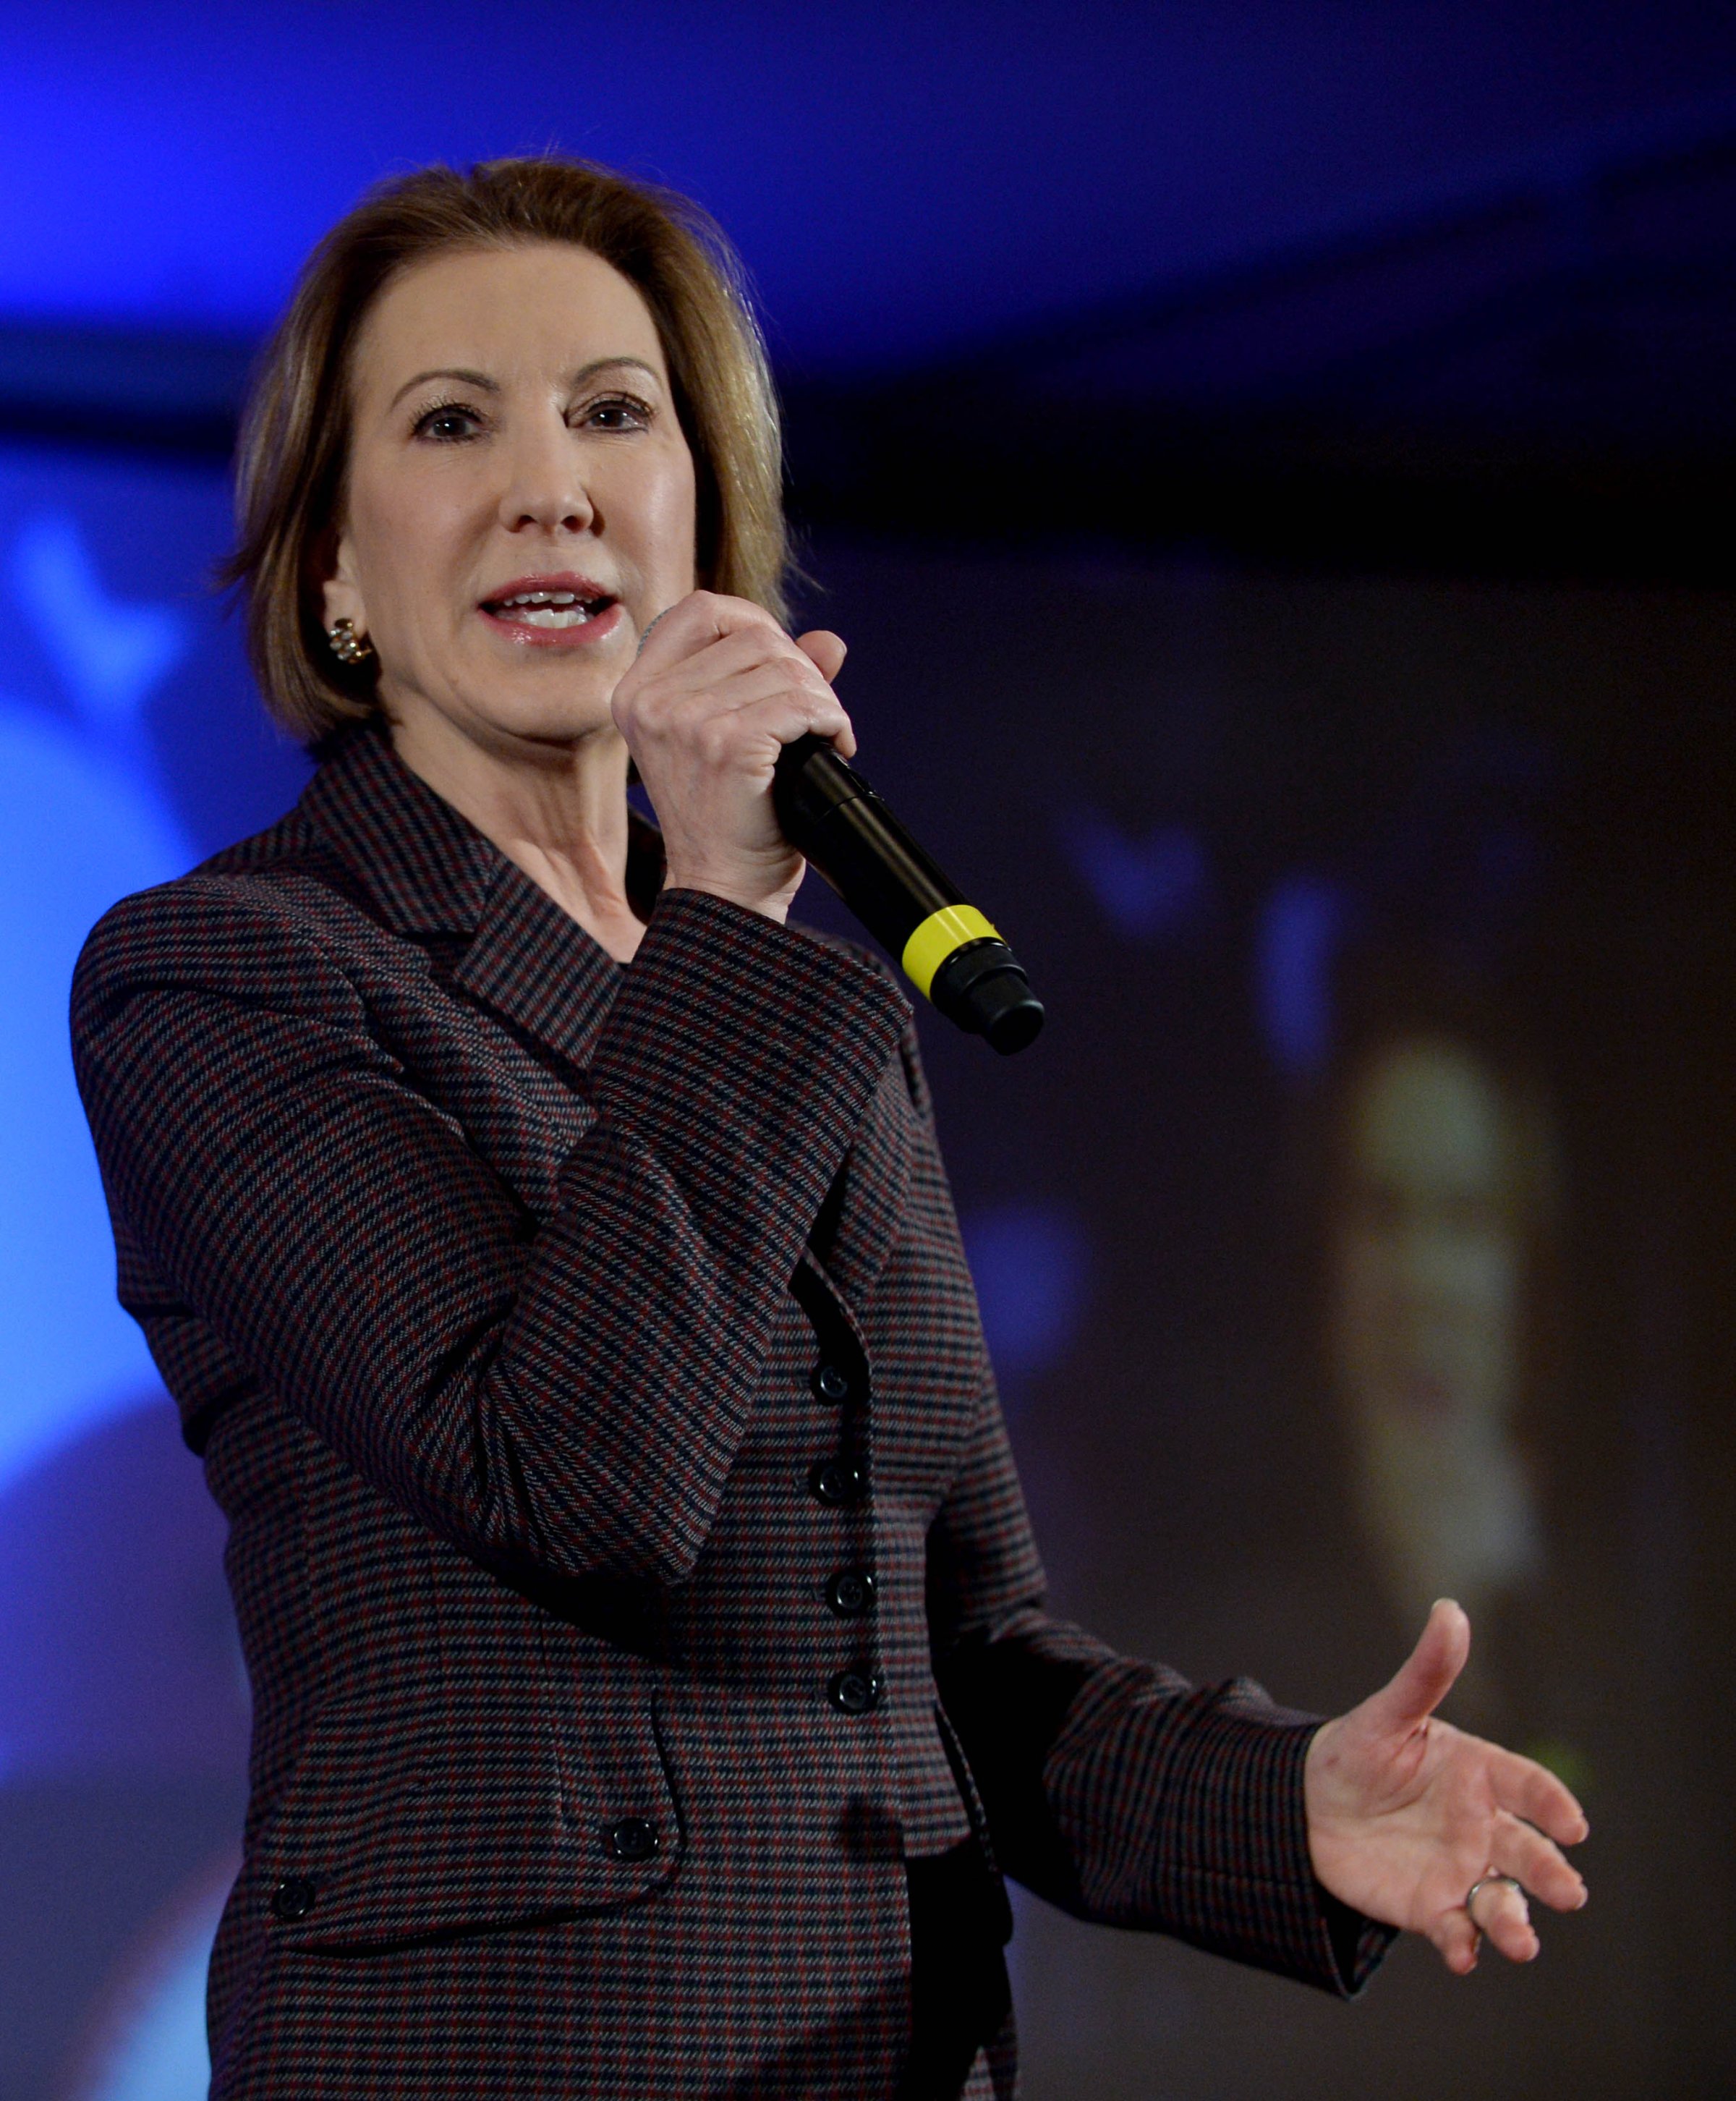 Republican presidential candidate Carly Fiorina speaks at the NHGOP First In The Nation Town Hall in Nashua, N.H., on Jan. 23, 2016.